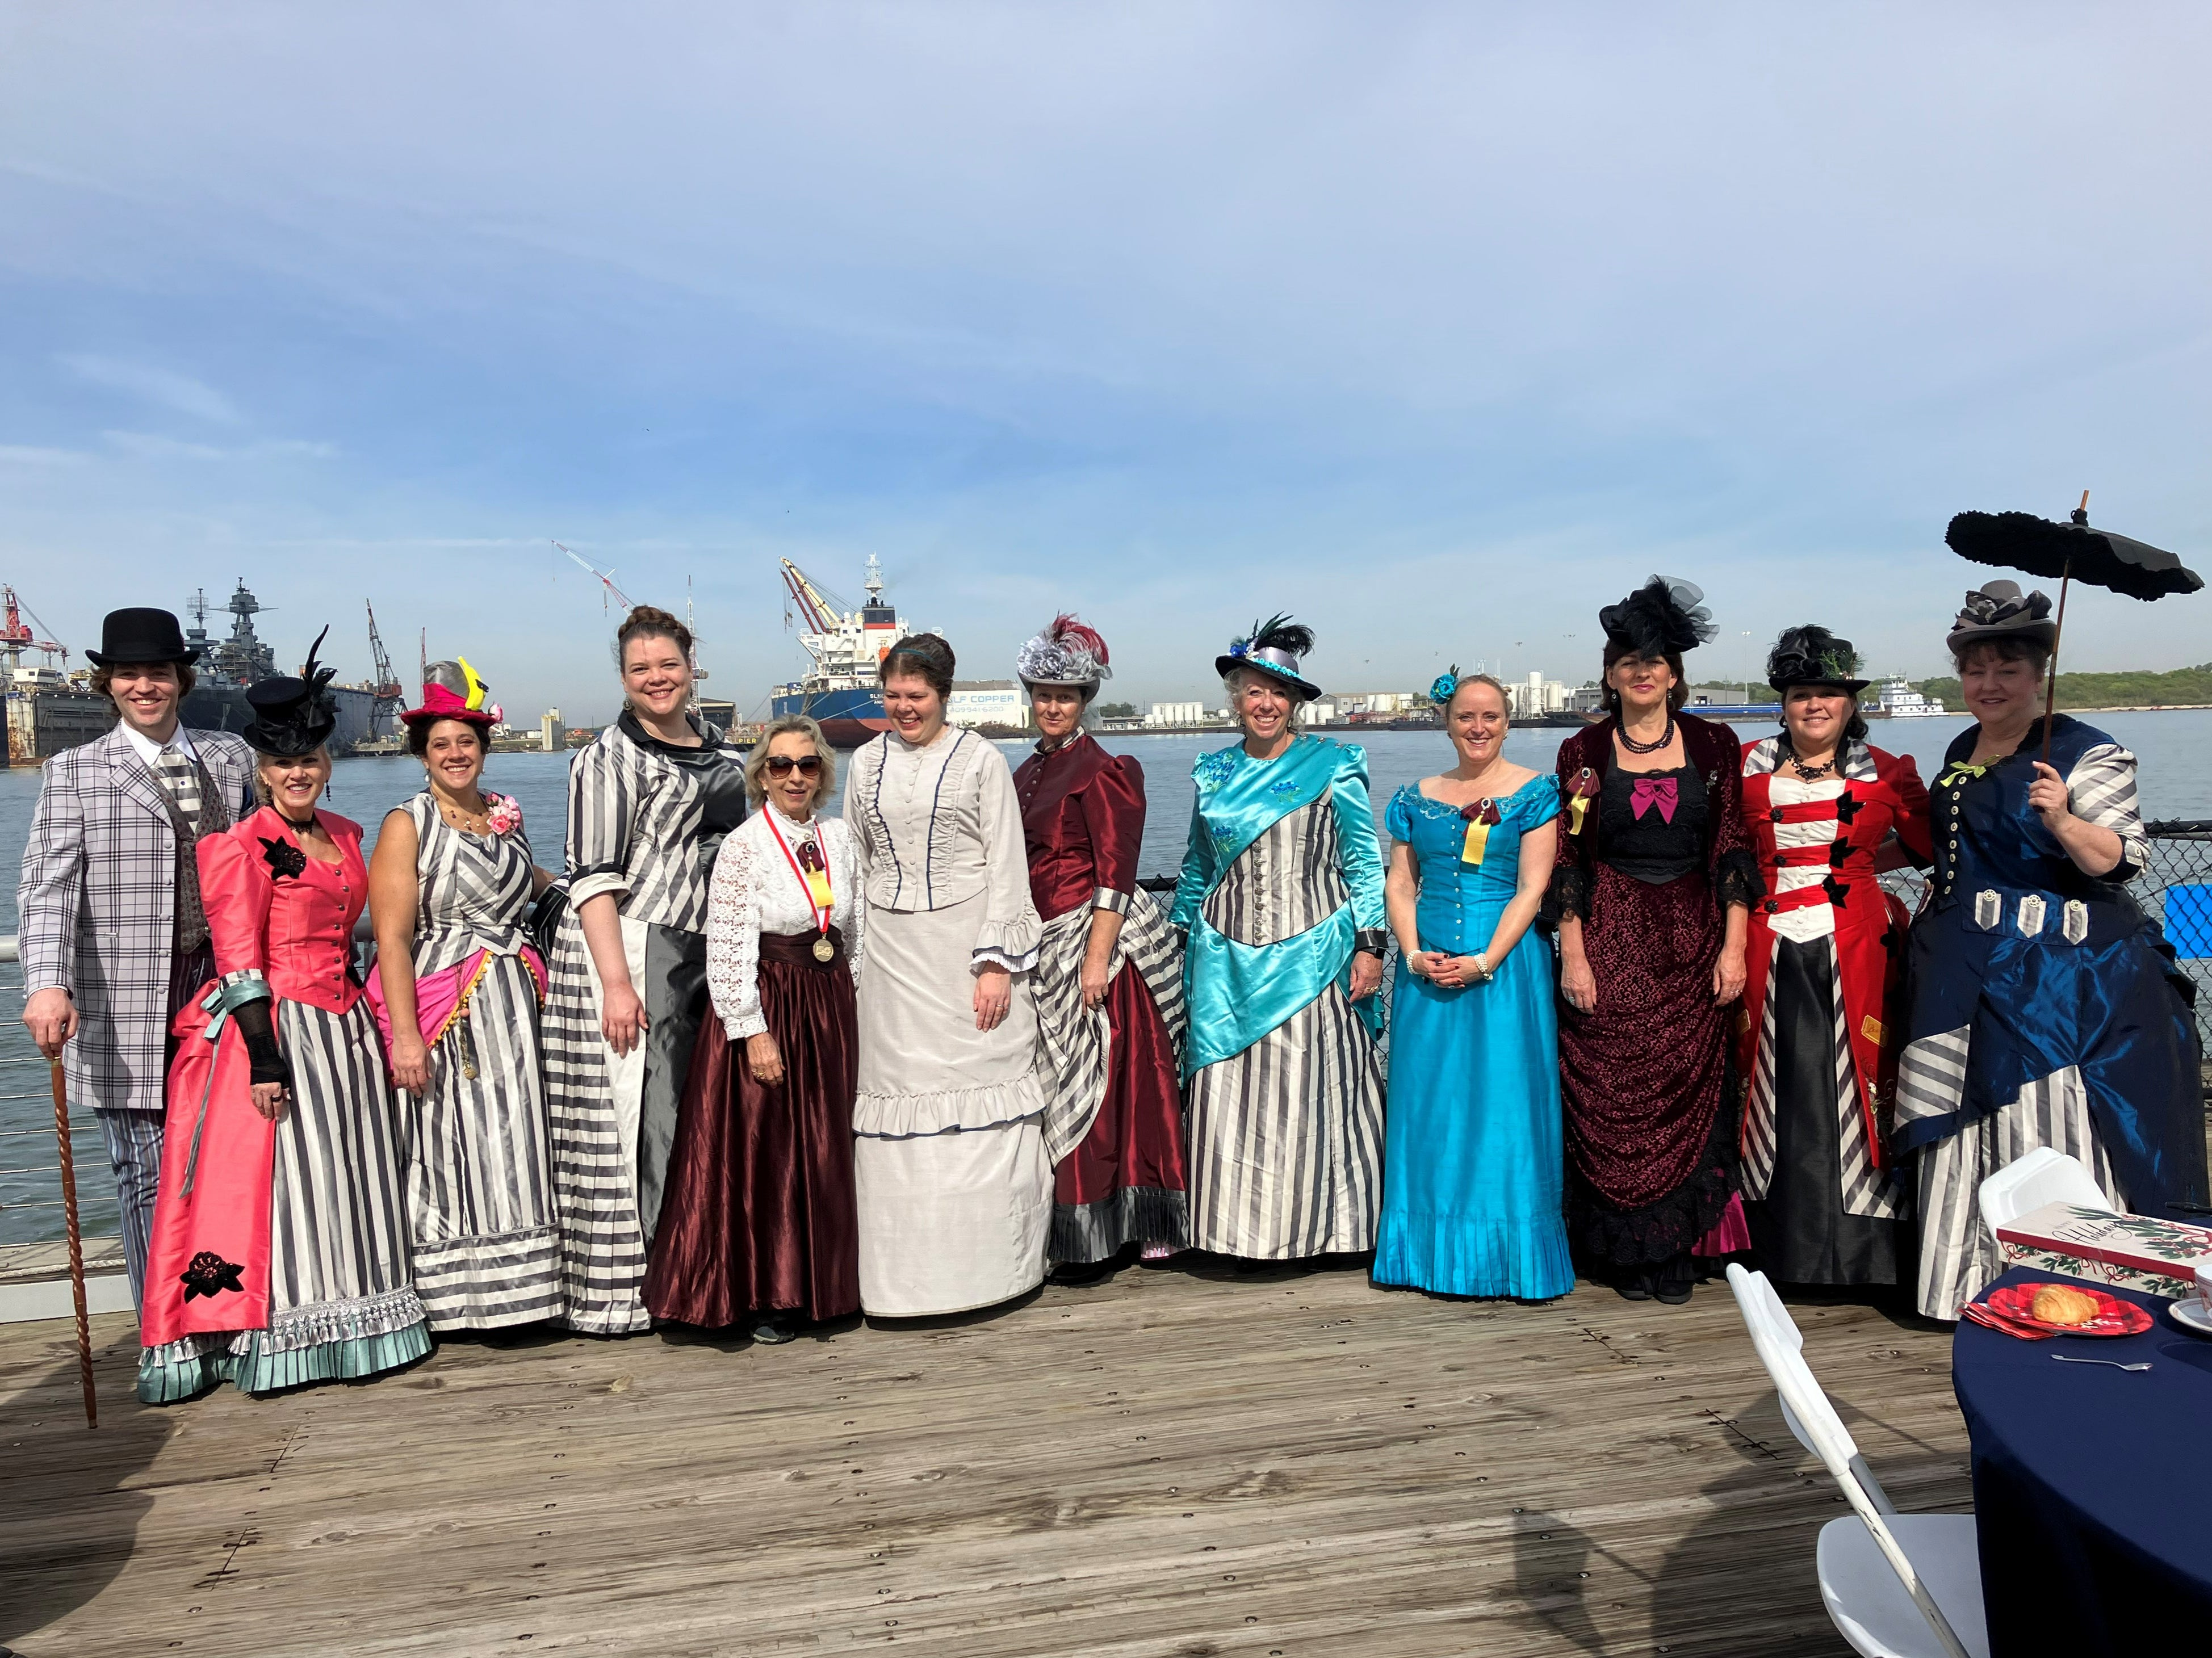 Texans take their Dickens seriously at Galveston’s annual festival celebrating the author